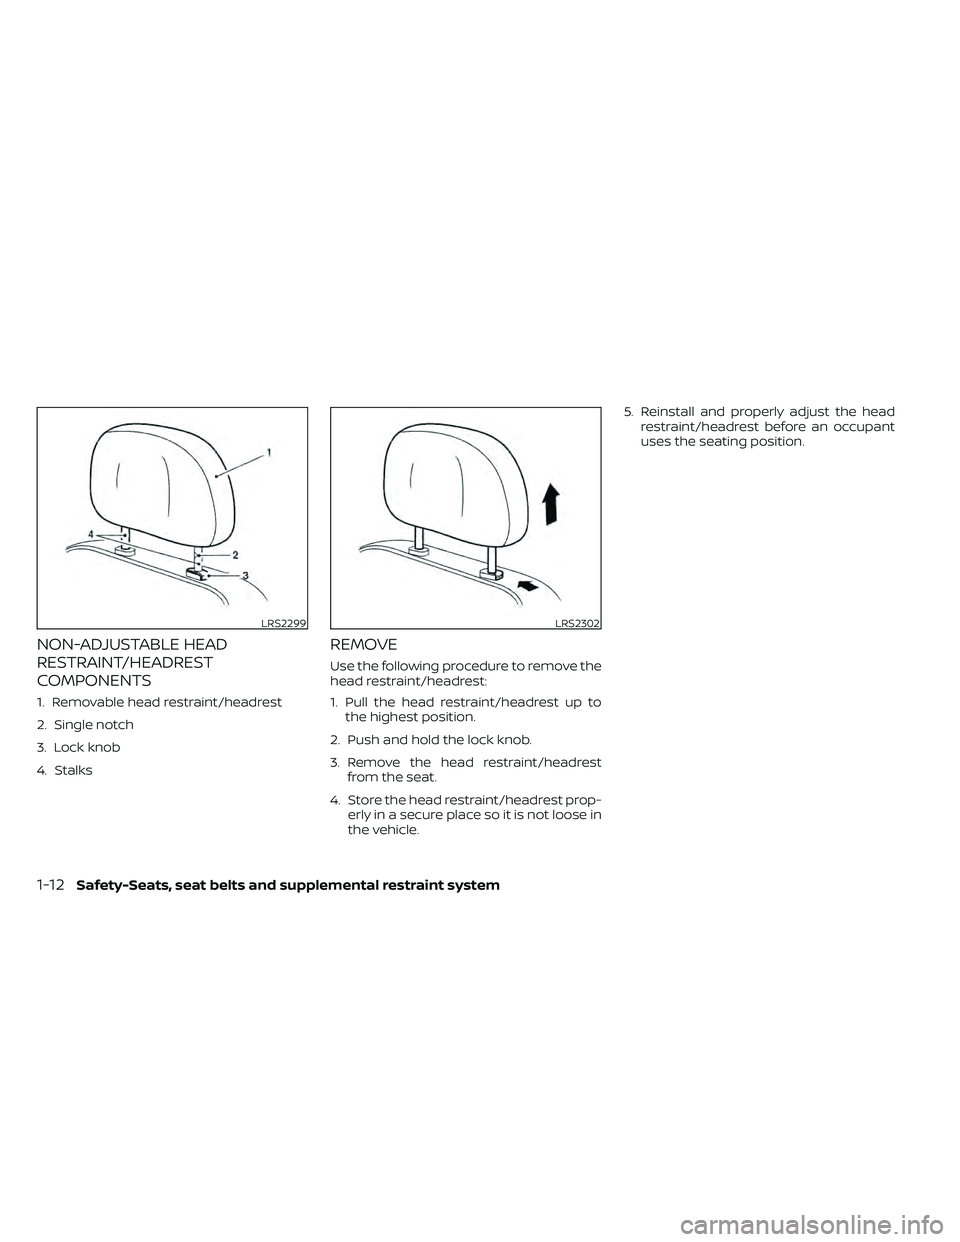 NISSAN FRONTIER 2021  Owners Manual NON-ADJUSTABLE HEAD
RESTRAINT/HEADREST
COMPONENTS
1. Removable head restraint/headrest
2. Single notch
3. Lock knob
4. Stalks
REMOVE
Use the following procedure to remove the
head restraint/headrest:
